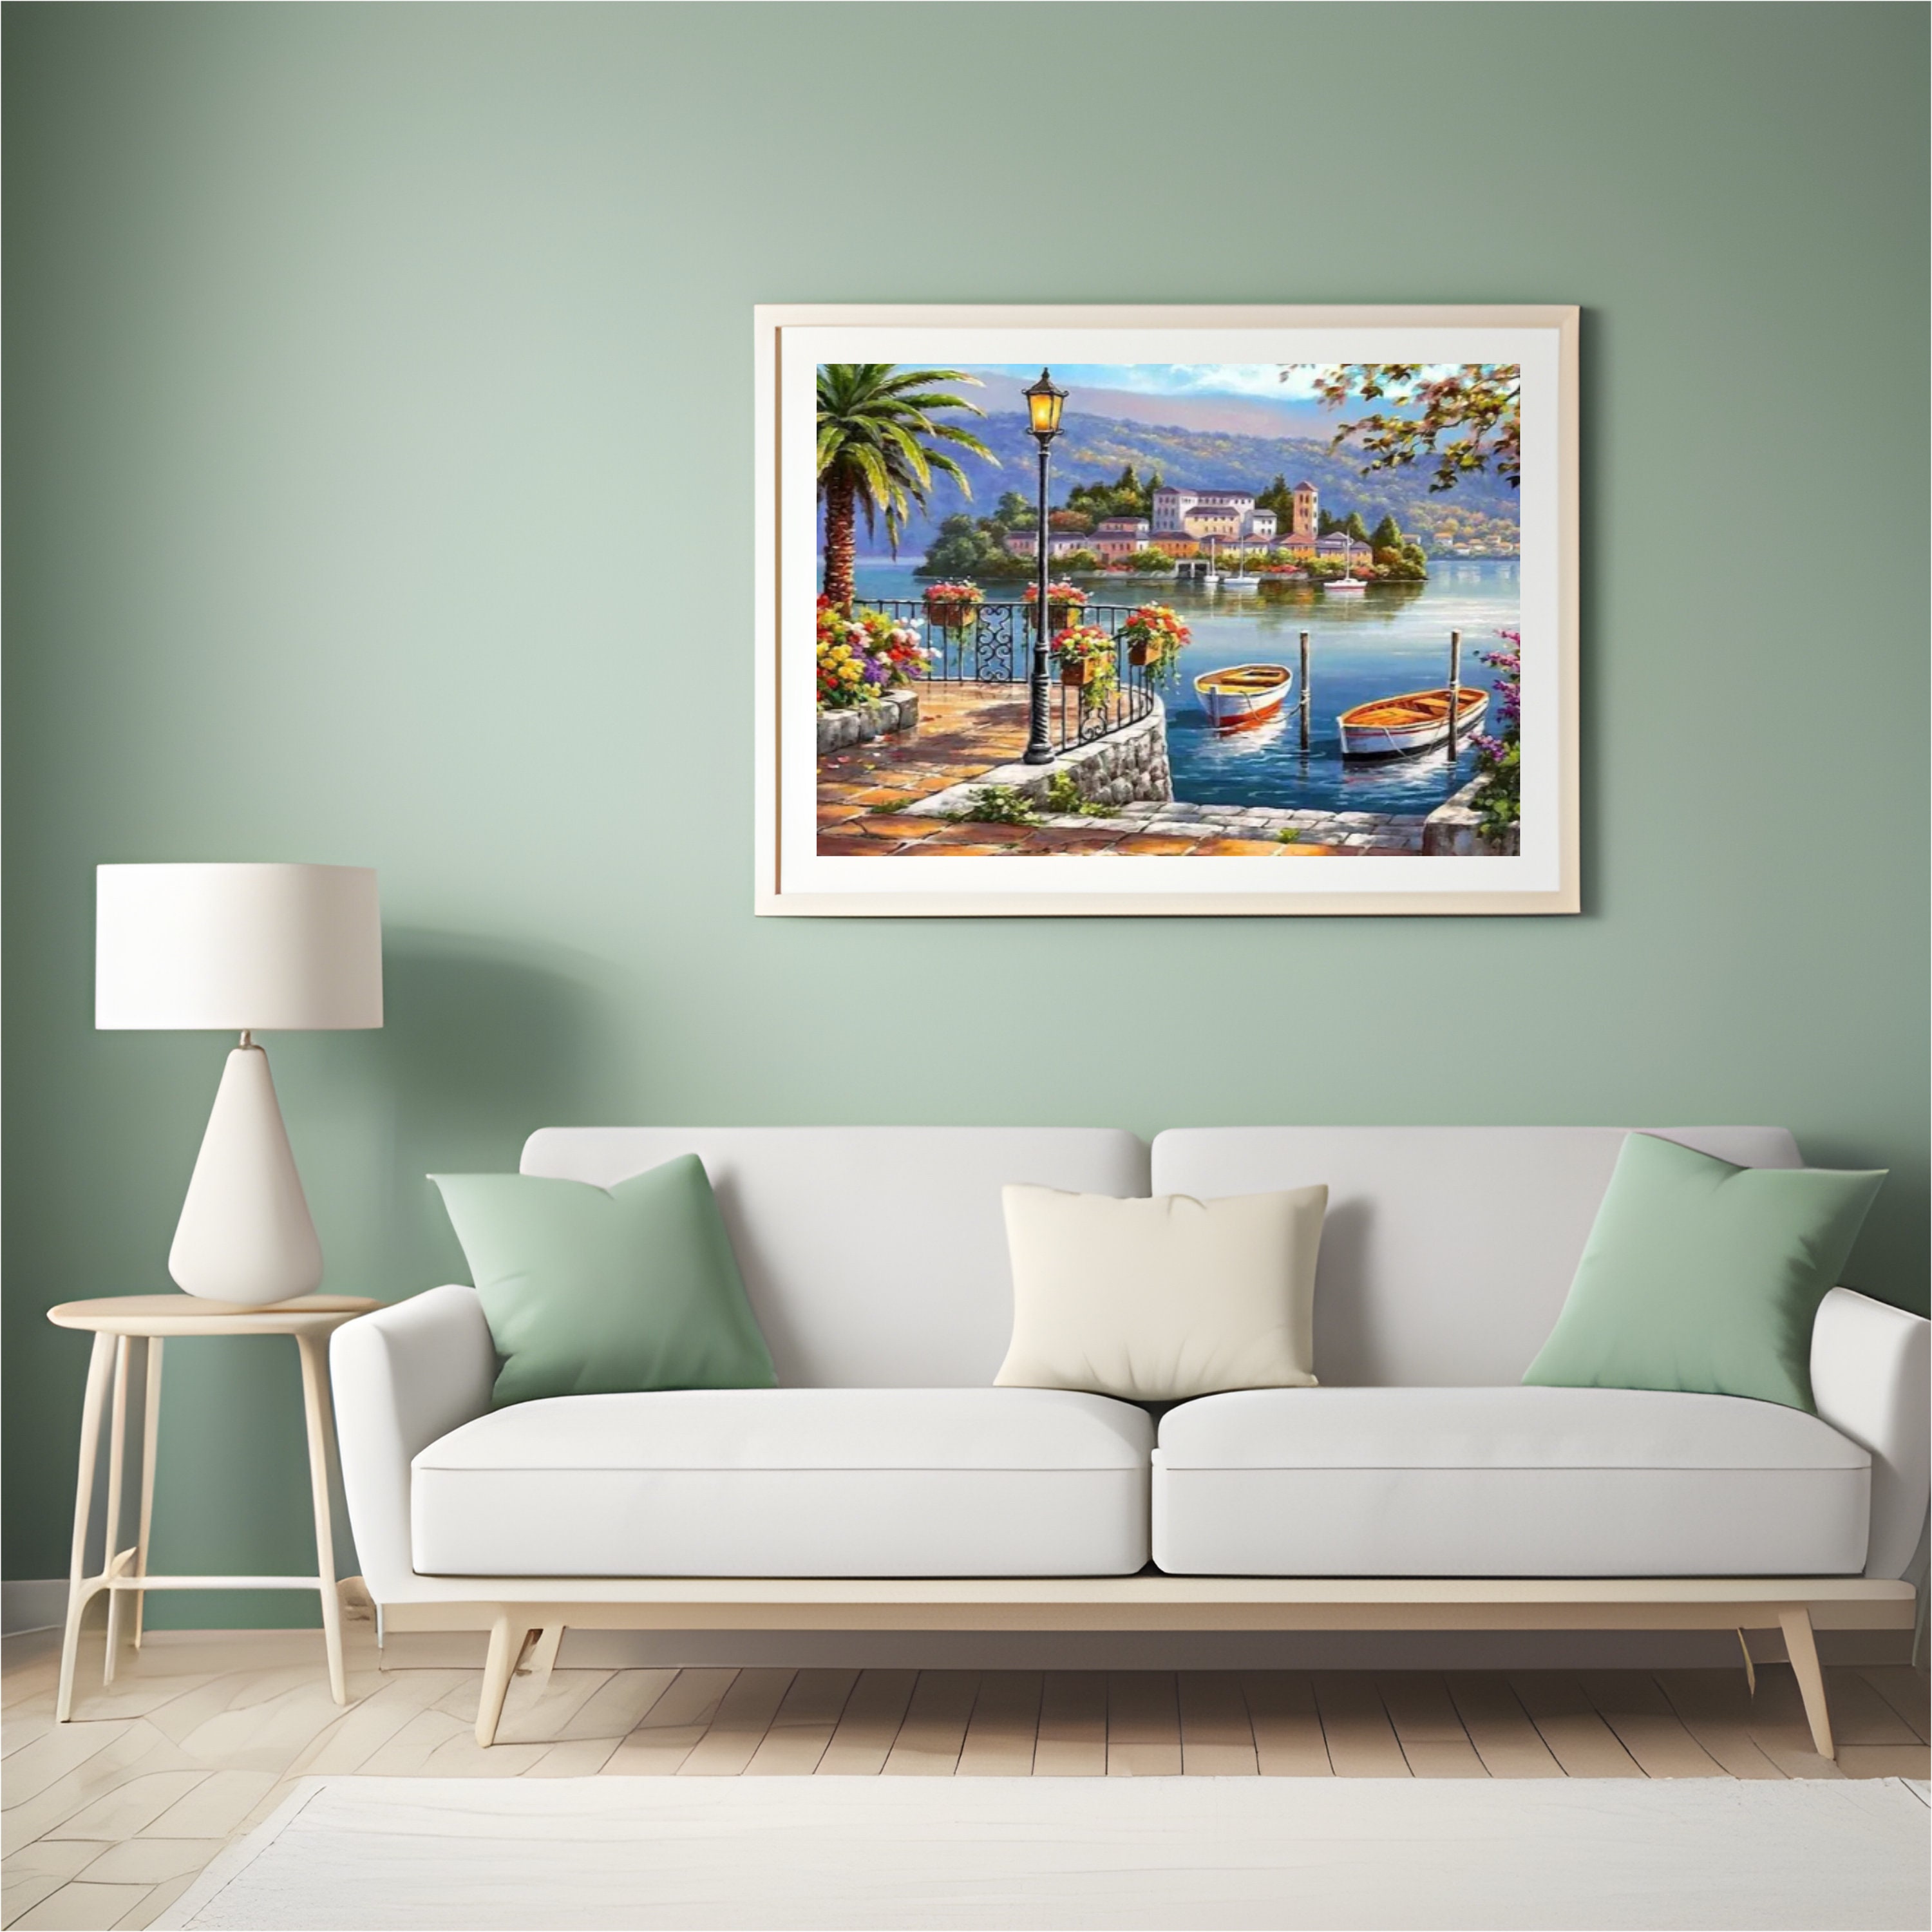 CreArt Mediterranean Landscape - Paint by numbers for adults